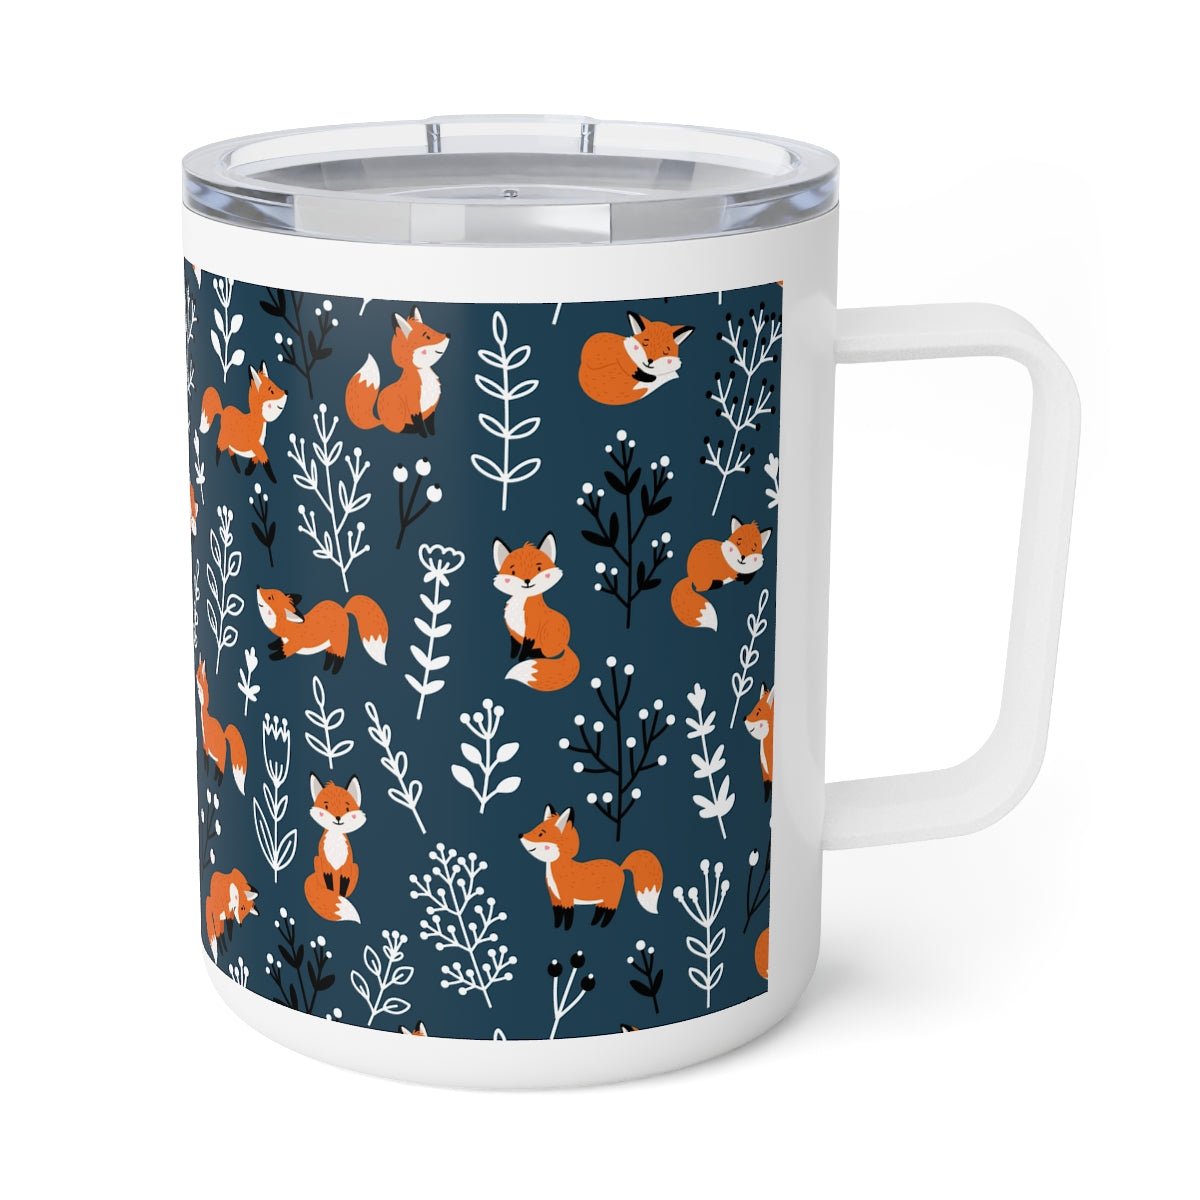 Happy Foxes Insulated Coffee Mug, 10oz - Puffin Lime